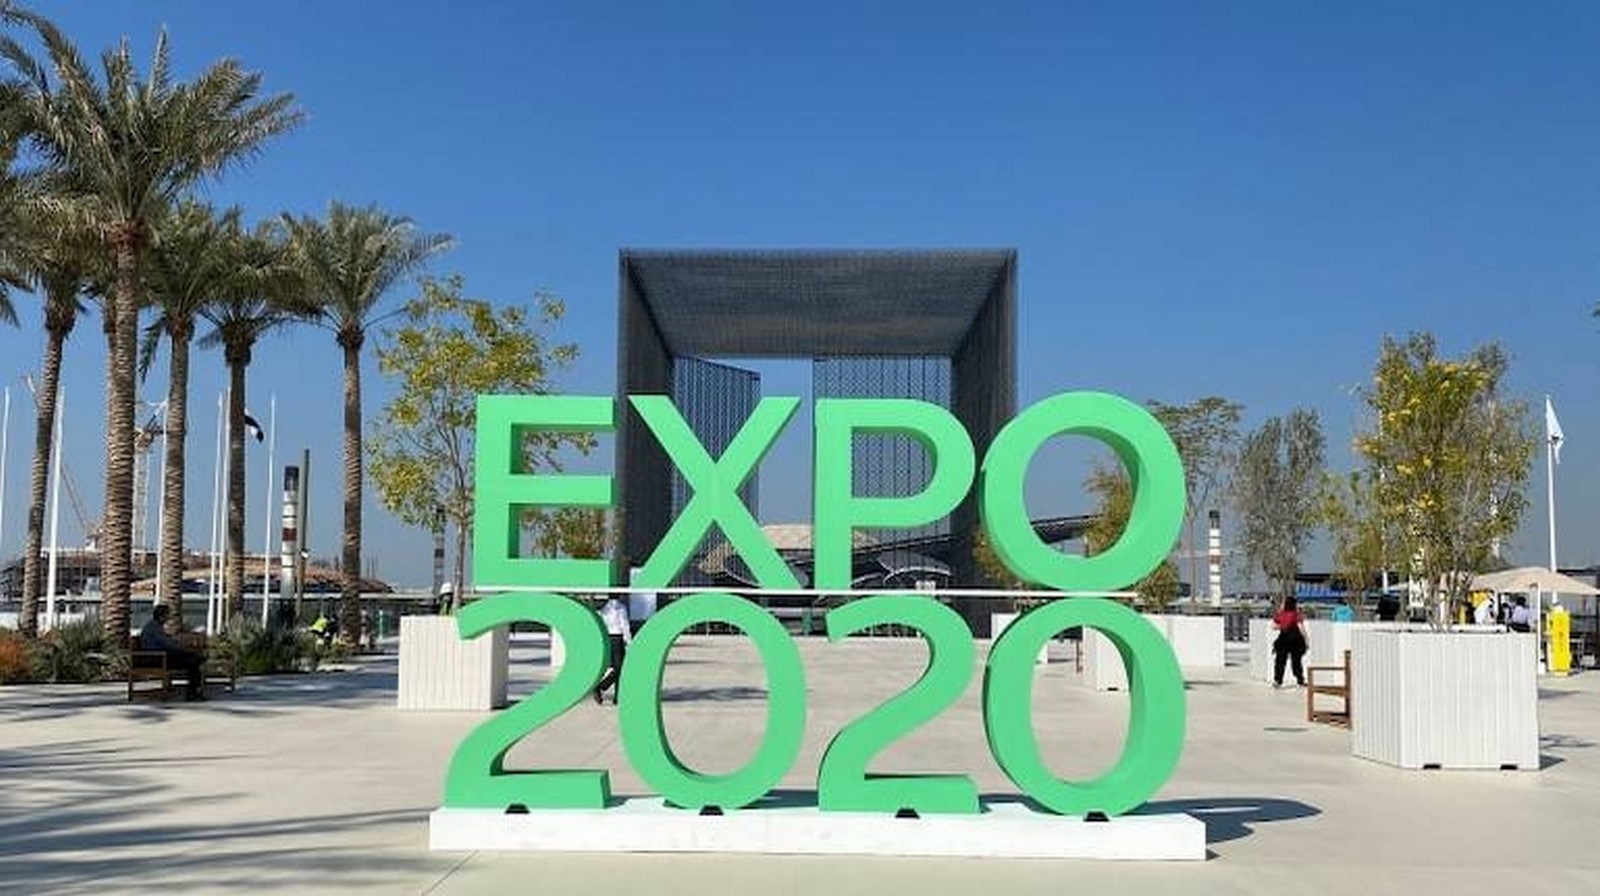 Dubai Expo 2020- what can one witness - Sheet1